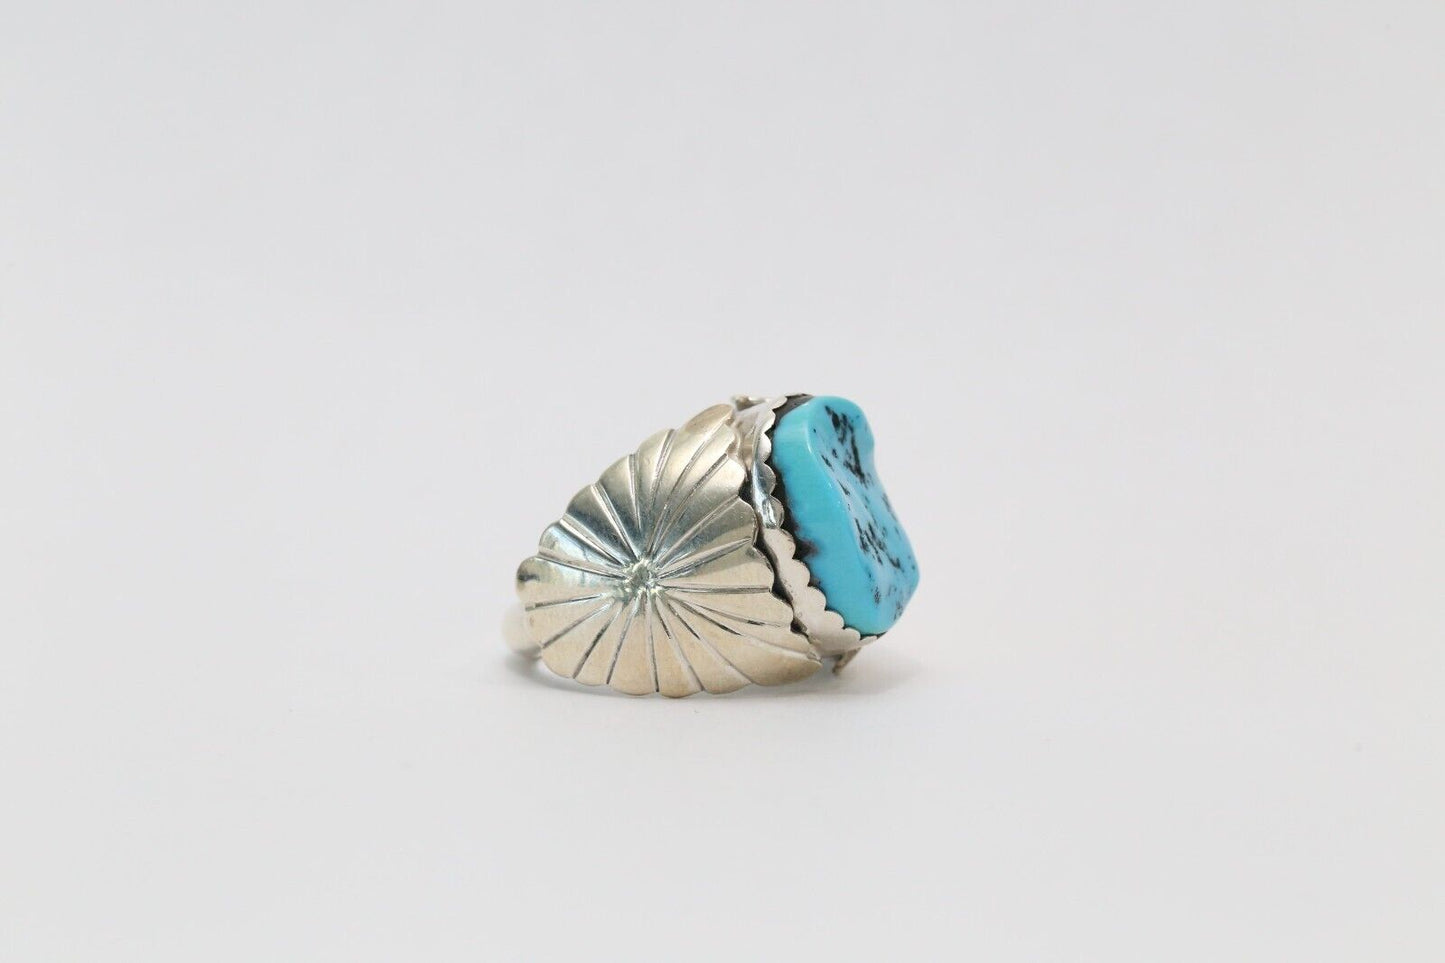 N Juan Sterling Silver Turquoise Ring, Size 9.5 - 11.8g